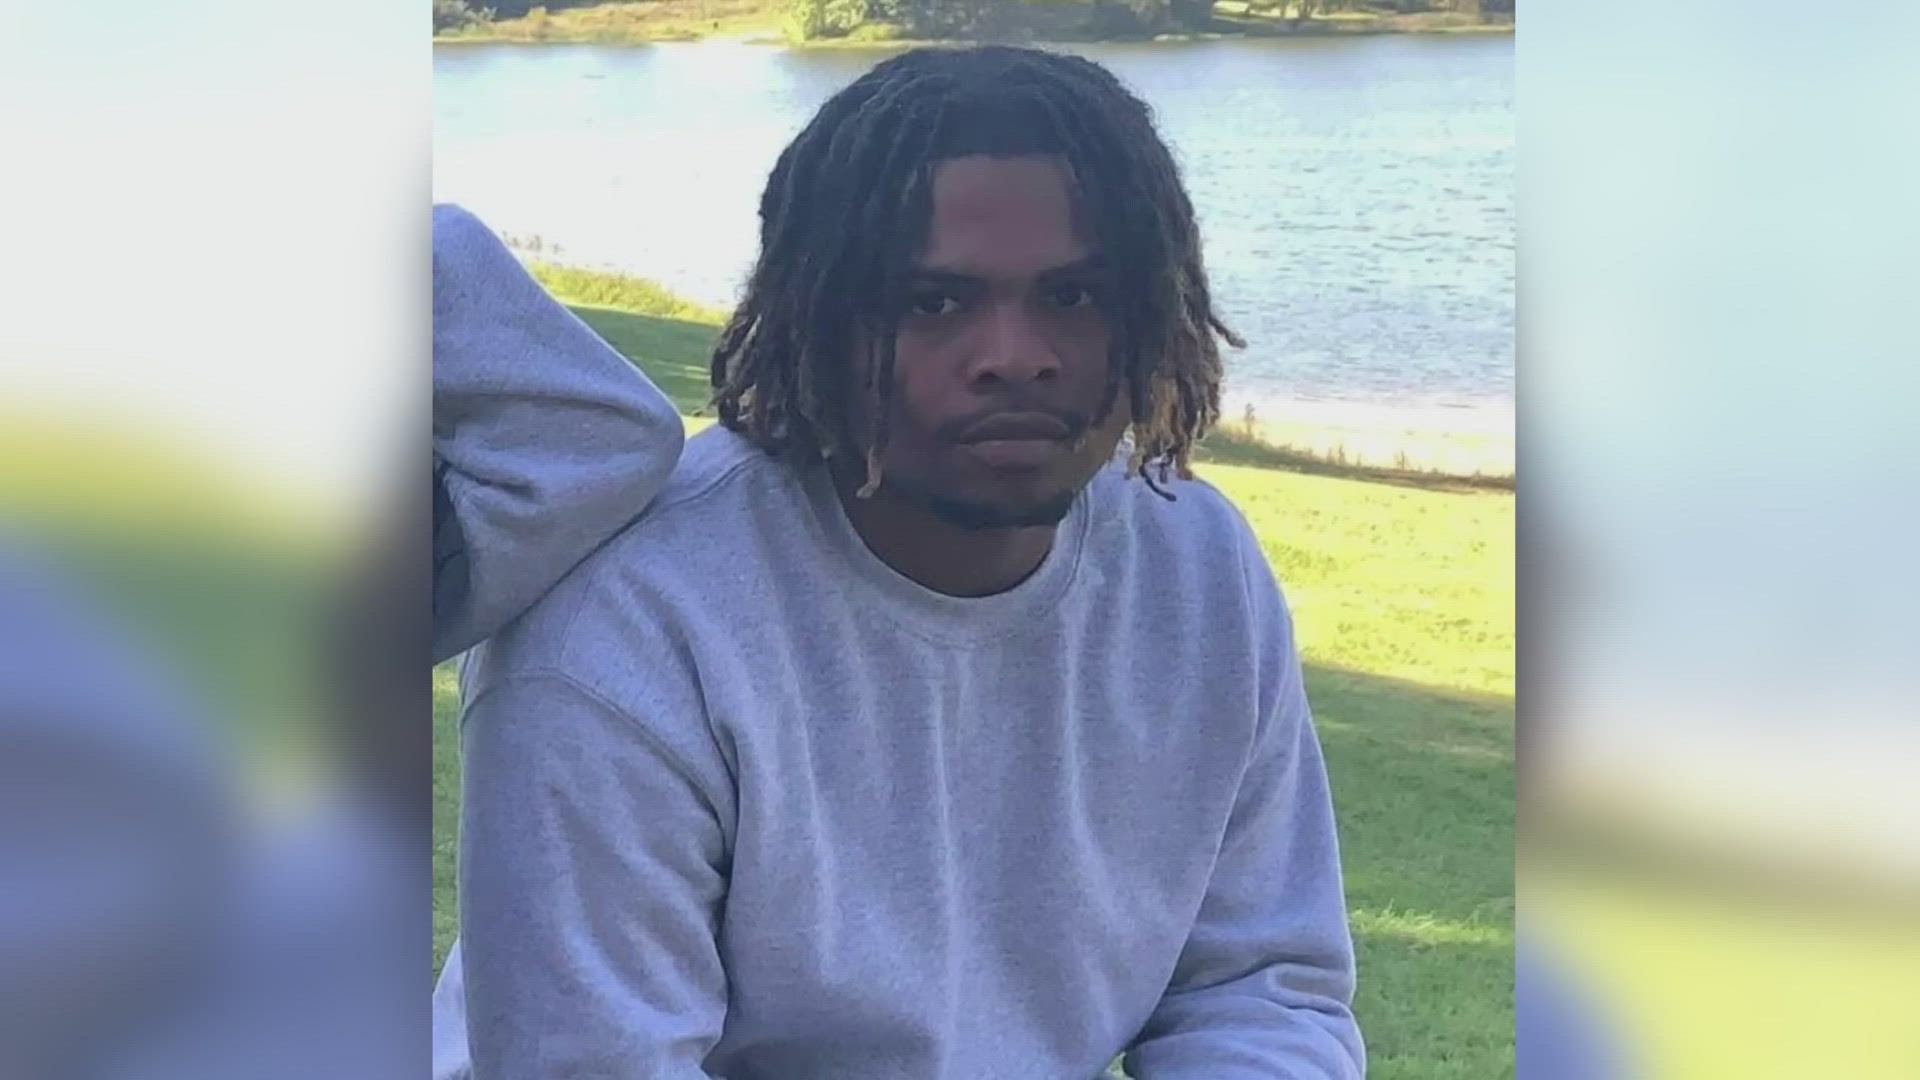 David Huff, 17, is being remembered after he was one of two victims killed during a mass shooting at Chickasaw Park on Apr. 15.